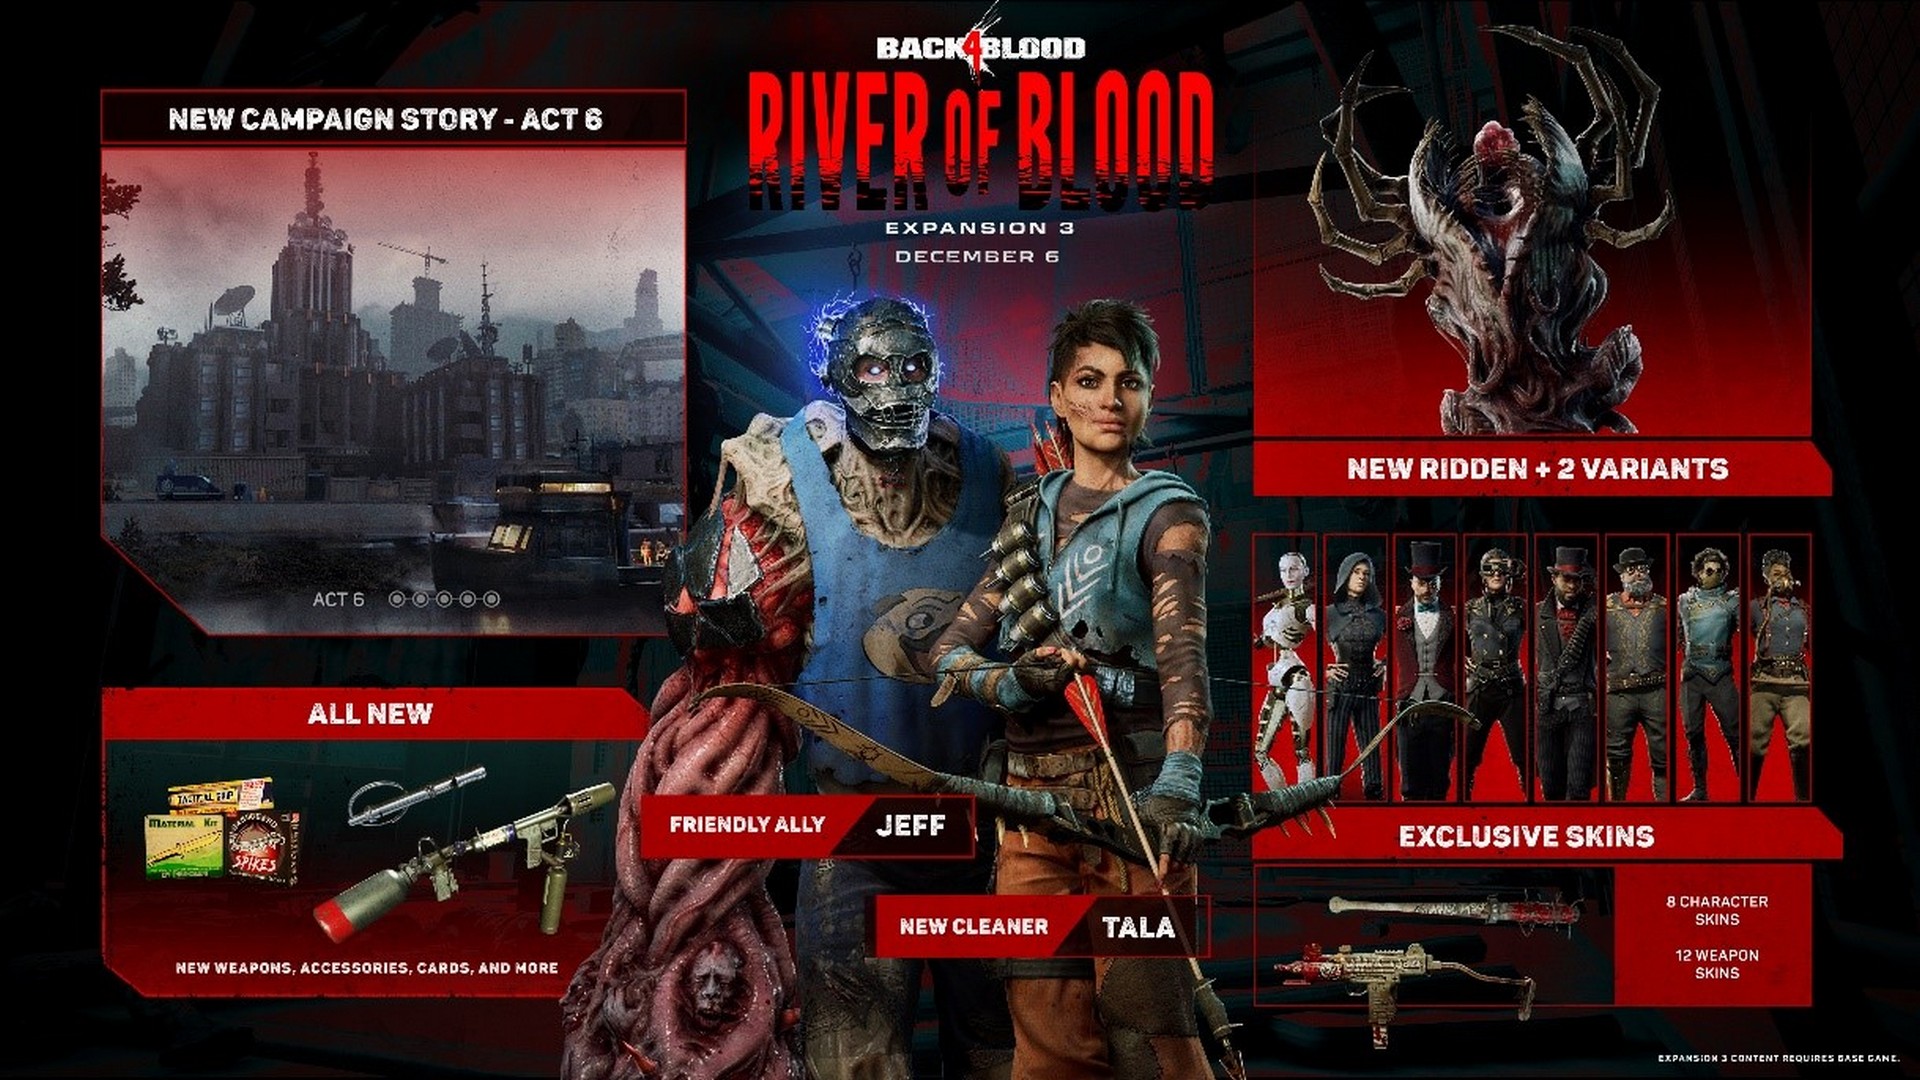 Back 4 Blood Expansion 3 ‘River Of Blood’ Announced